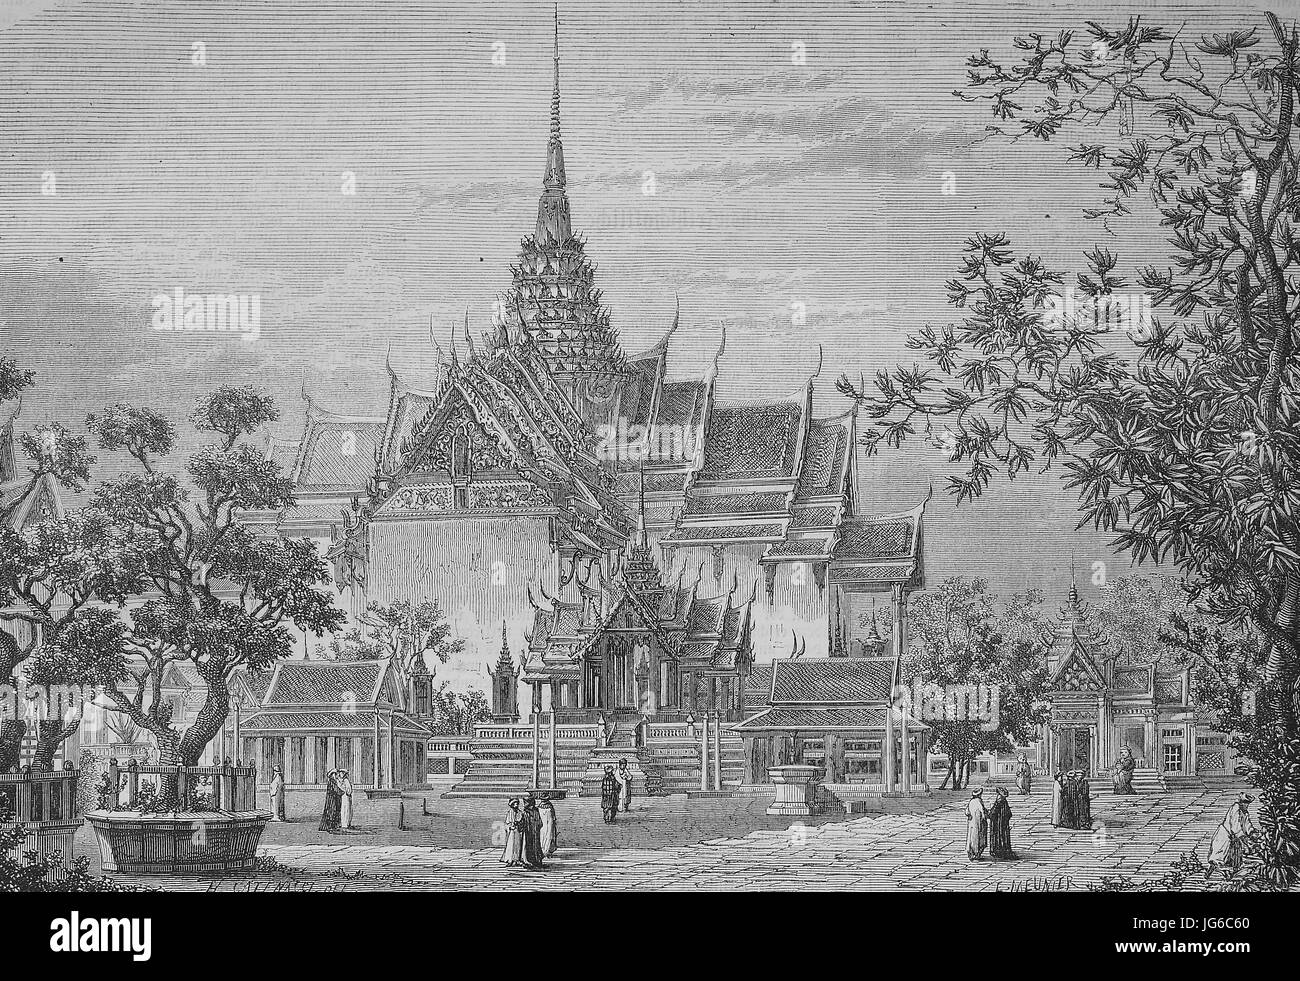 Digital improved:, The temple with the grave urns of the Kings of Siam, Thailand, illustration from the 19th century Stock Photo